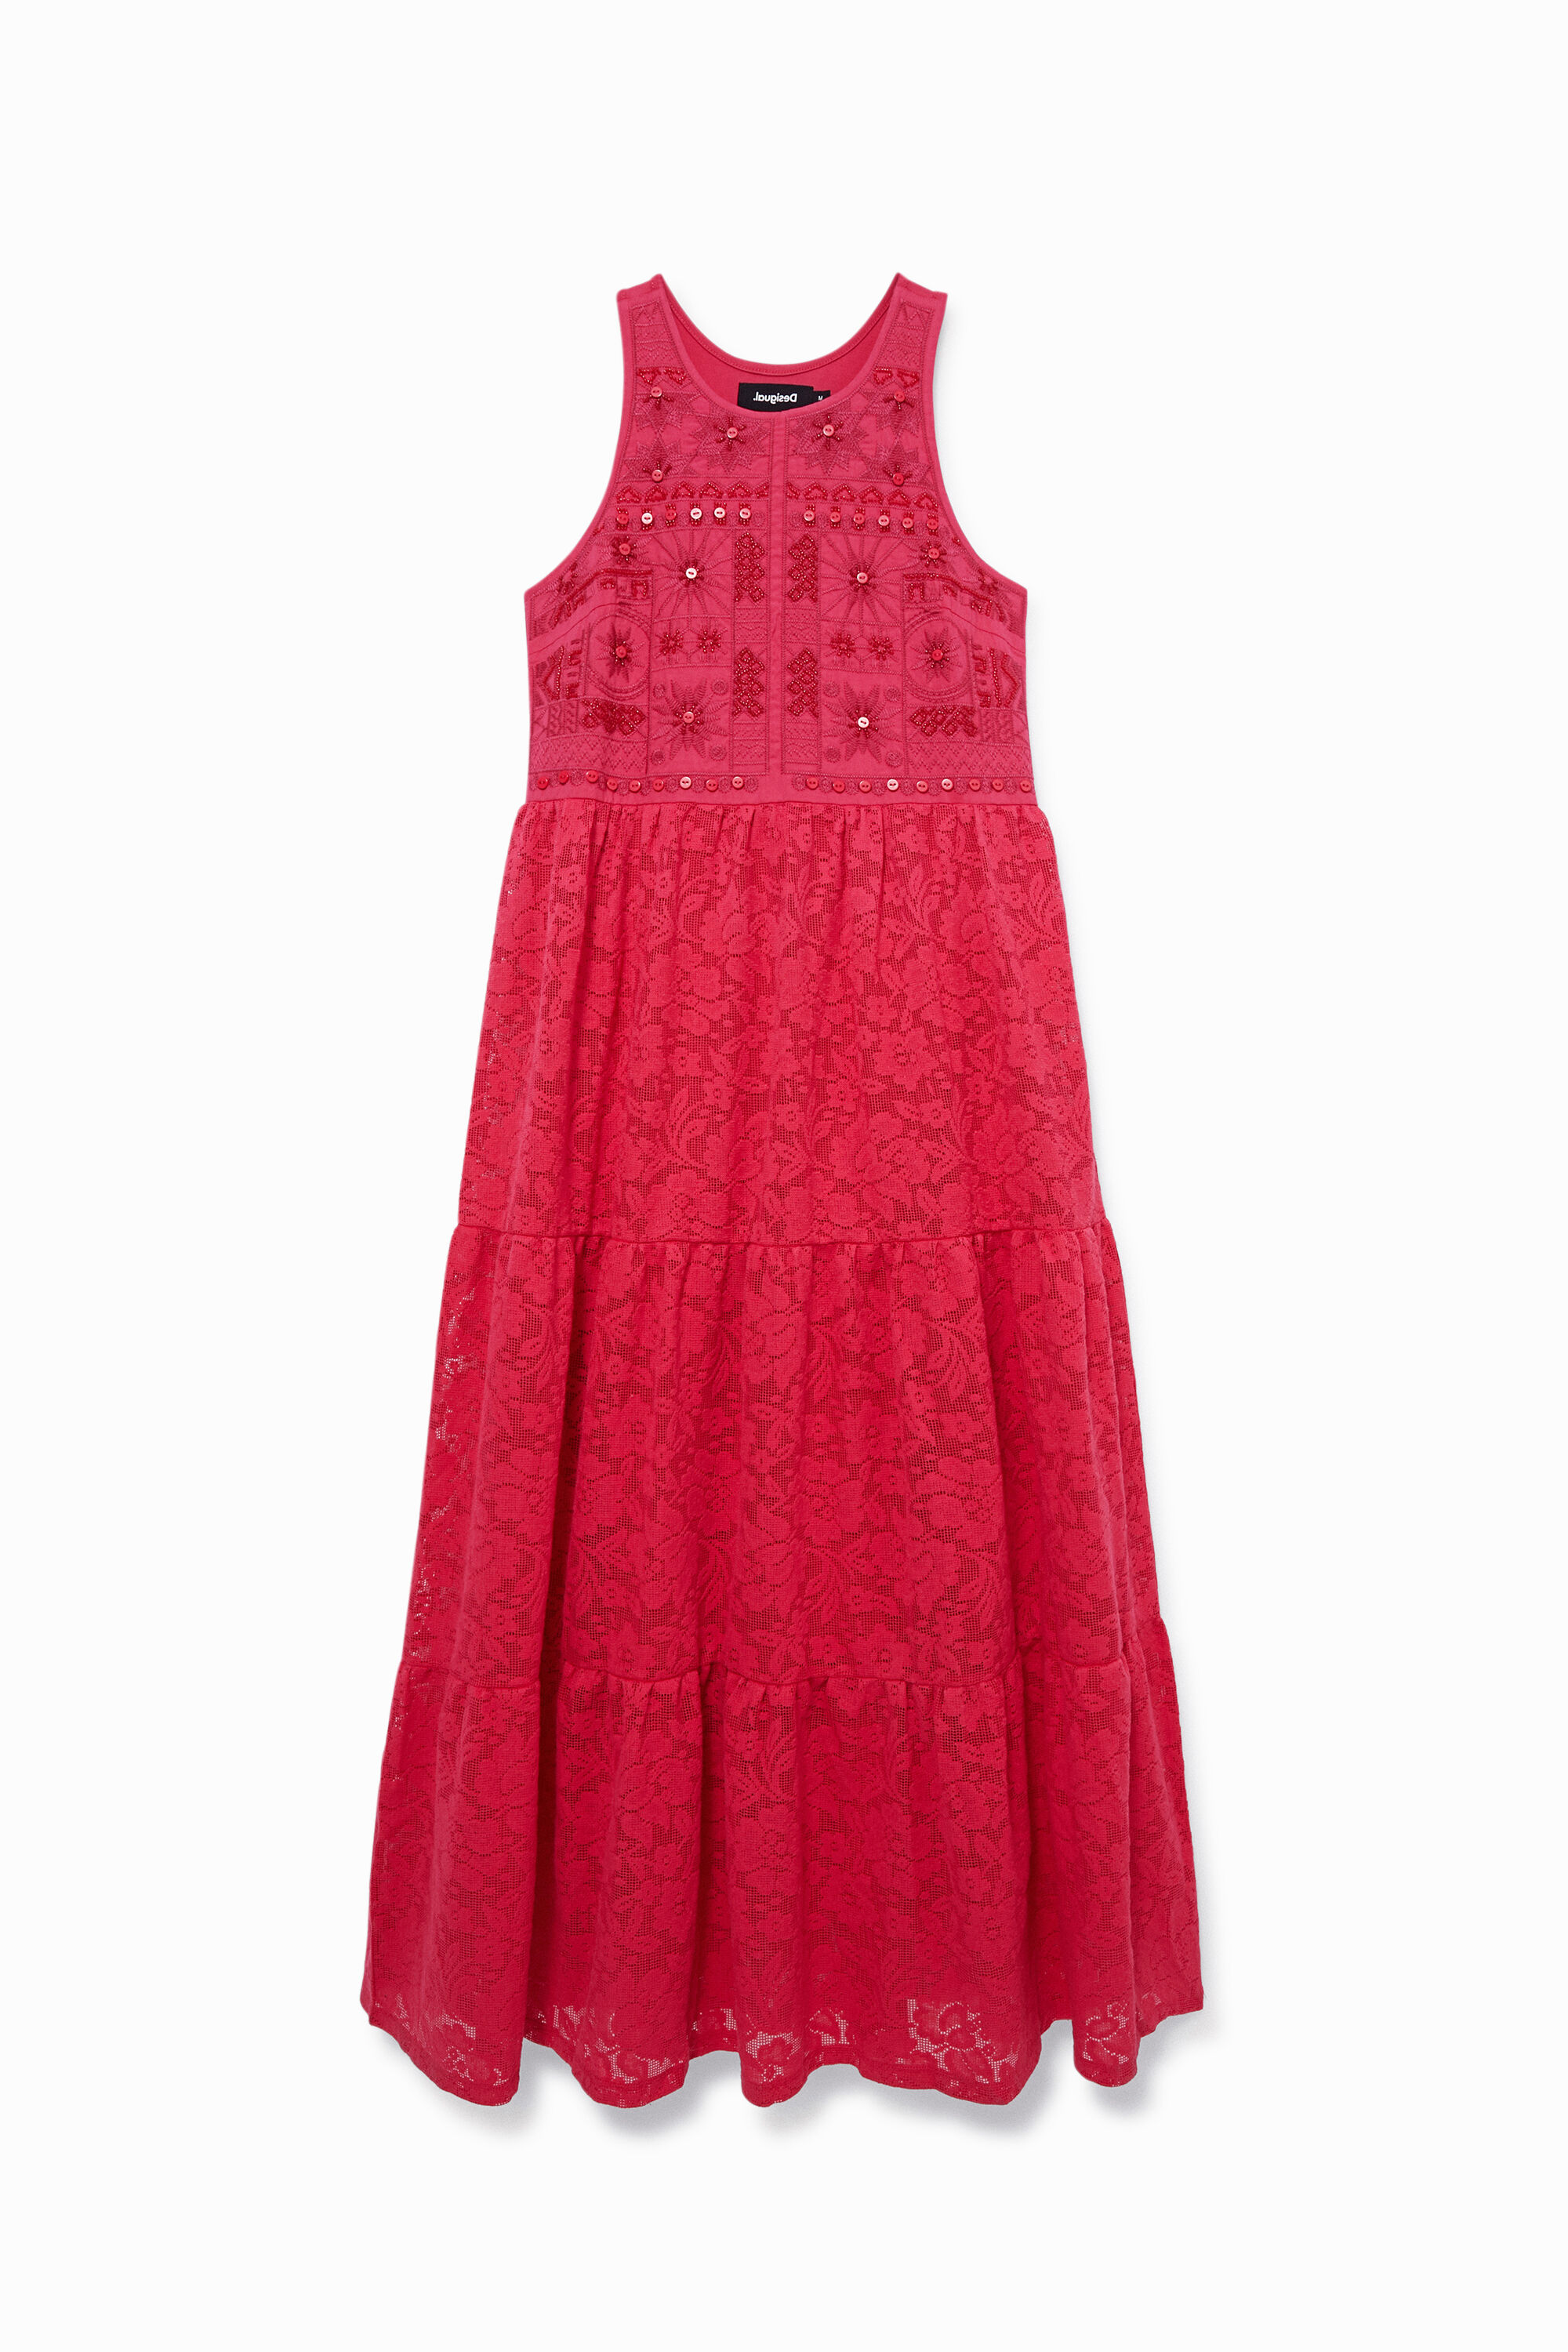 Desigual Ethnic Lace Dress In Red